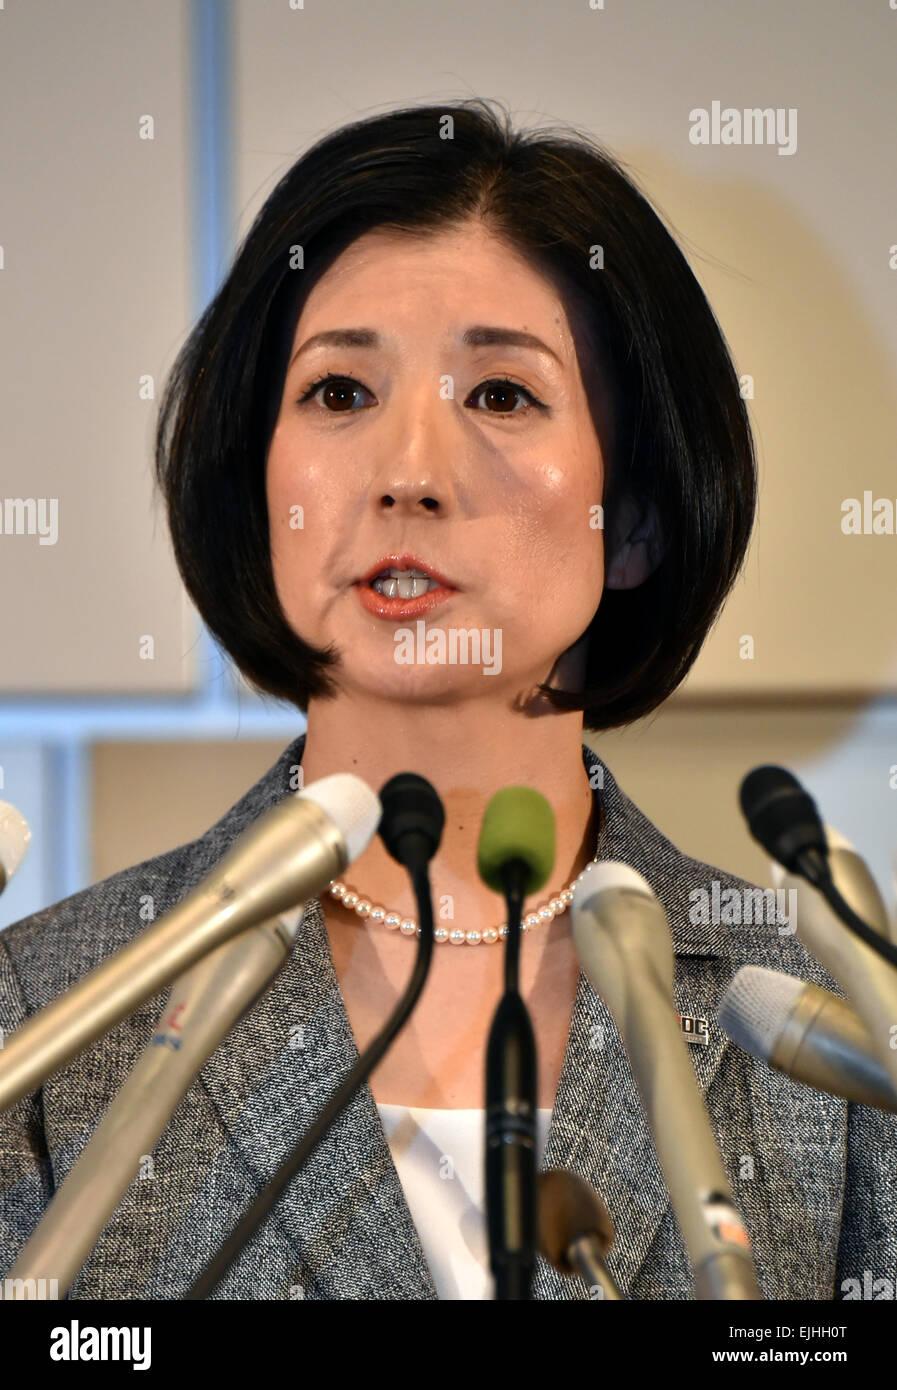 Tokyo, Japan. 27th Mar, 2015. President Kumiko Otsuka of major Japanese furniture retailer Otsuka Kagu Ltd. speaks during a news conference in Tokyo following its annual shareholders' meeting on Friday, March 27, 2015. In a proxy fight over management, the companys founder and chairman, Katsuhisa Otsuka, 71, sought to overthrow his daughter, Kumiko, but shareholders voted down the chairman's proposal and selected a board favorable to his daughter. © Natsuki Sakai/AFLO/Alamy Live News Stock Photo